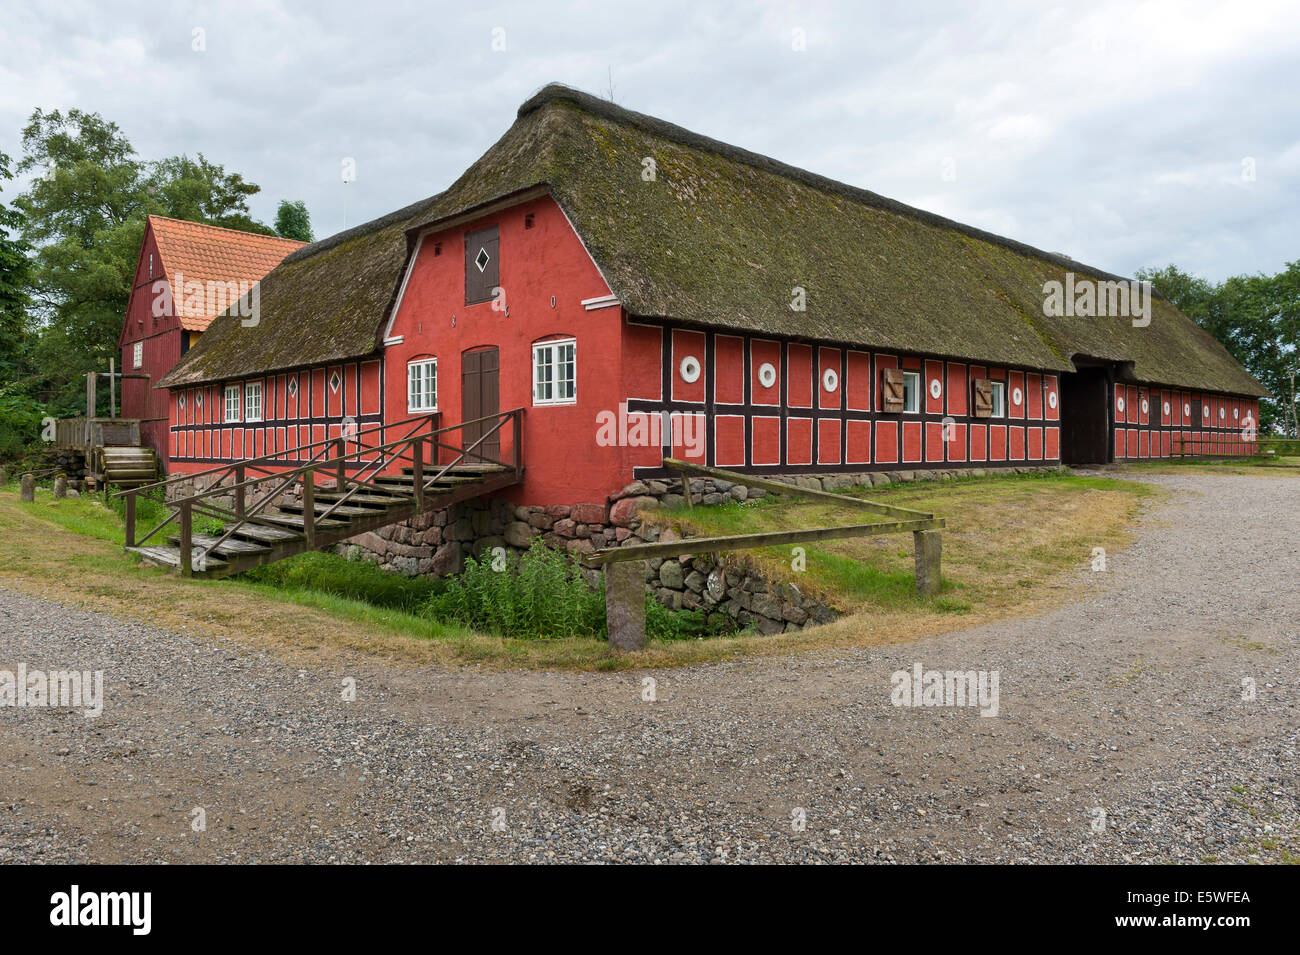 Thatched, red painted half-timbered building with old mill, Viking Center Fyrkat, Fyrkat, Hobro, Denmark Stock Photo